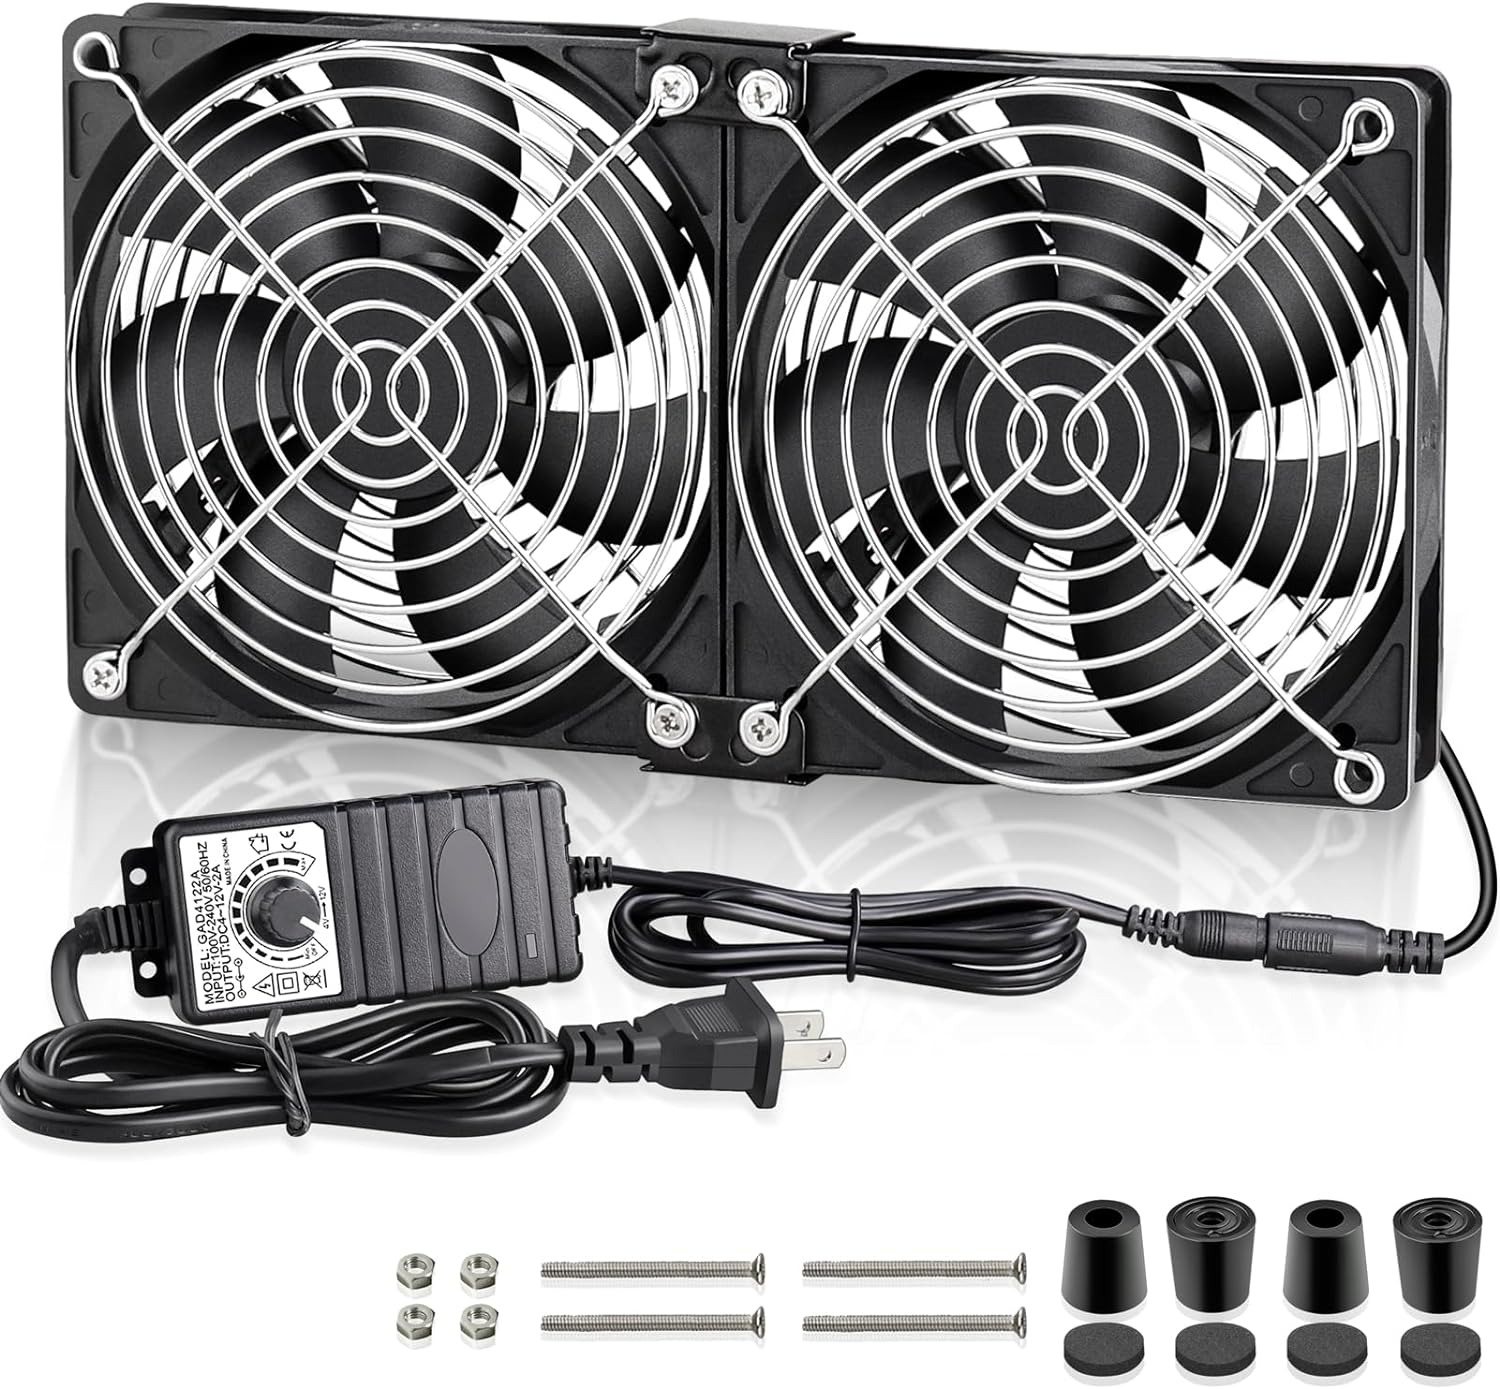 Big Airflow Dual 120Mm Fans DC 12V Powered Fan with AC 110V - 240V Speed Control